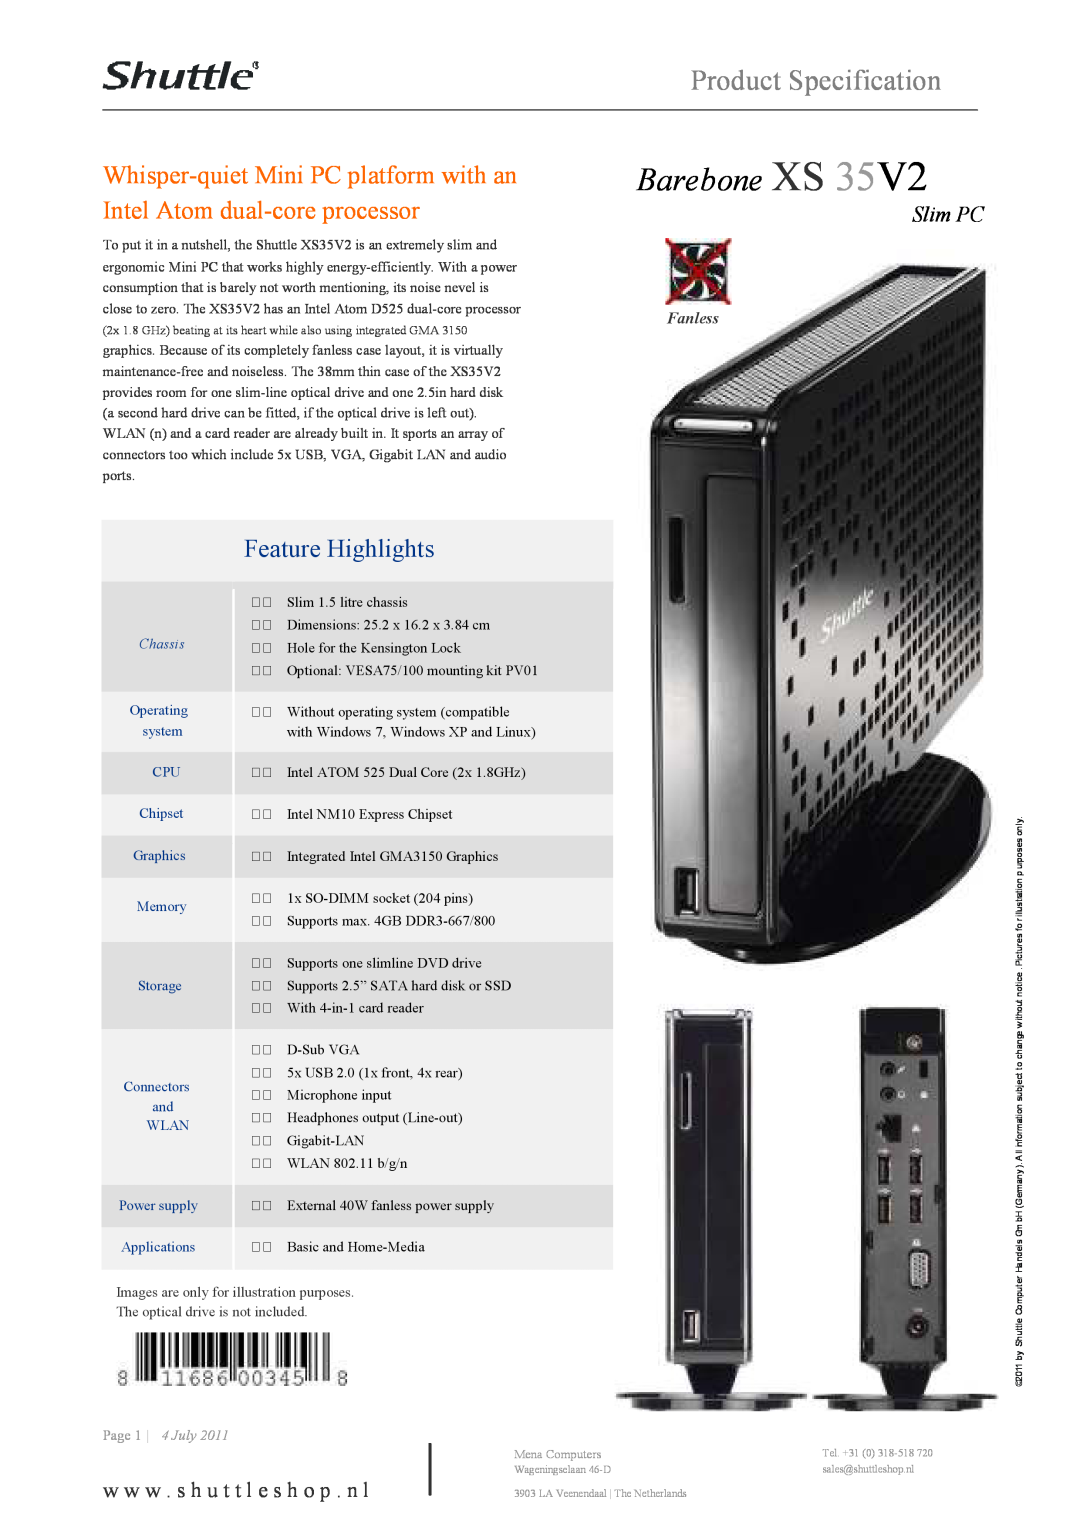 Shuttle Computer Group XS35V2 dimensions Product Specification, Whisper-quiet Mini PC platform with an, Feature Highlights 